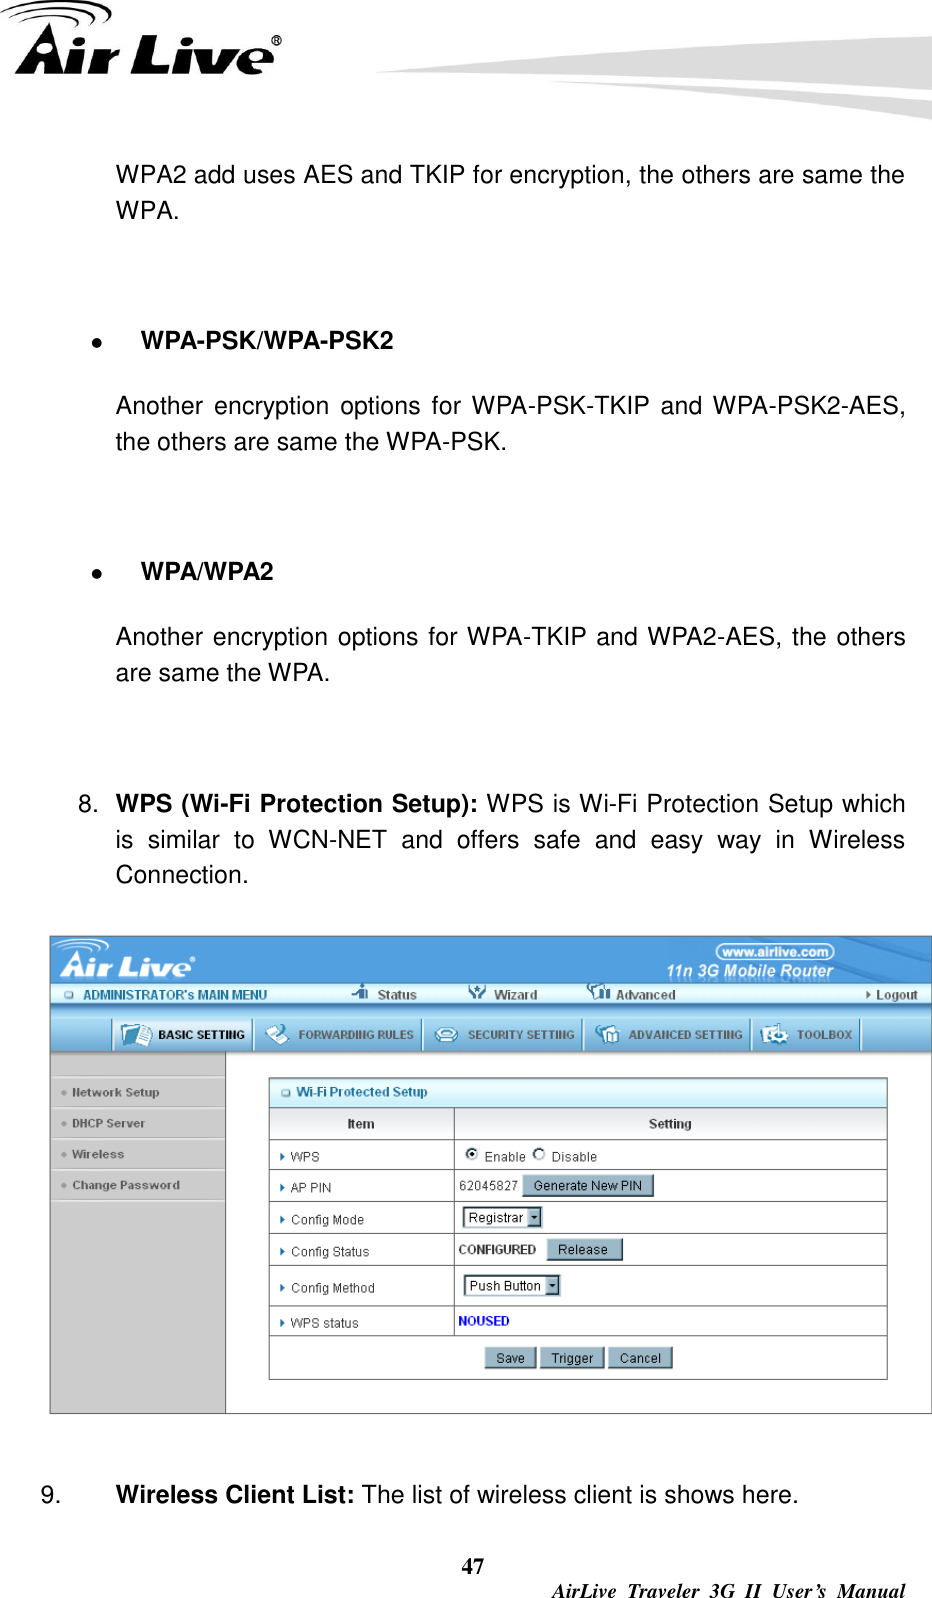  47  AirLive  Traveler  3G  II  User’s  Manual WPA2 add uses AES and TKIP for encryption, the others are same the WPA.   WPA-PSK/WPA-PSK2 Another  encryption  options for WPA-PSK-TKIP  and WPA-PSK2-AES, the others are same the WPA-PSK.   WPA/WPA2   Another encryption options for WPA-TKIP and WPA2-AES, the others are same the WPA.    8. WPS (Wi-Fi Protection Setup): WPS is Wi-Fi Protection Setup which is  similar  to  WCN-NET  and  offers  safe  and  easy  way  in  Wireless Connection.    9. Wireless Client List: The list of wireless client is shows here. 